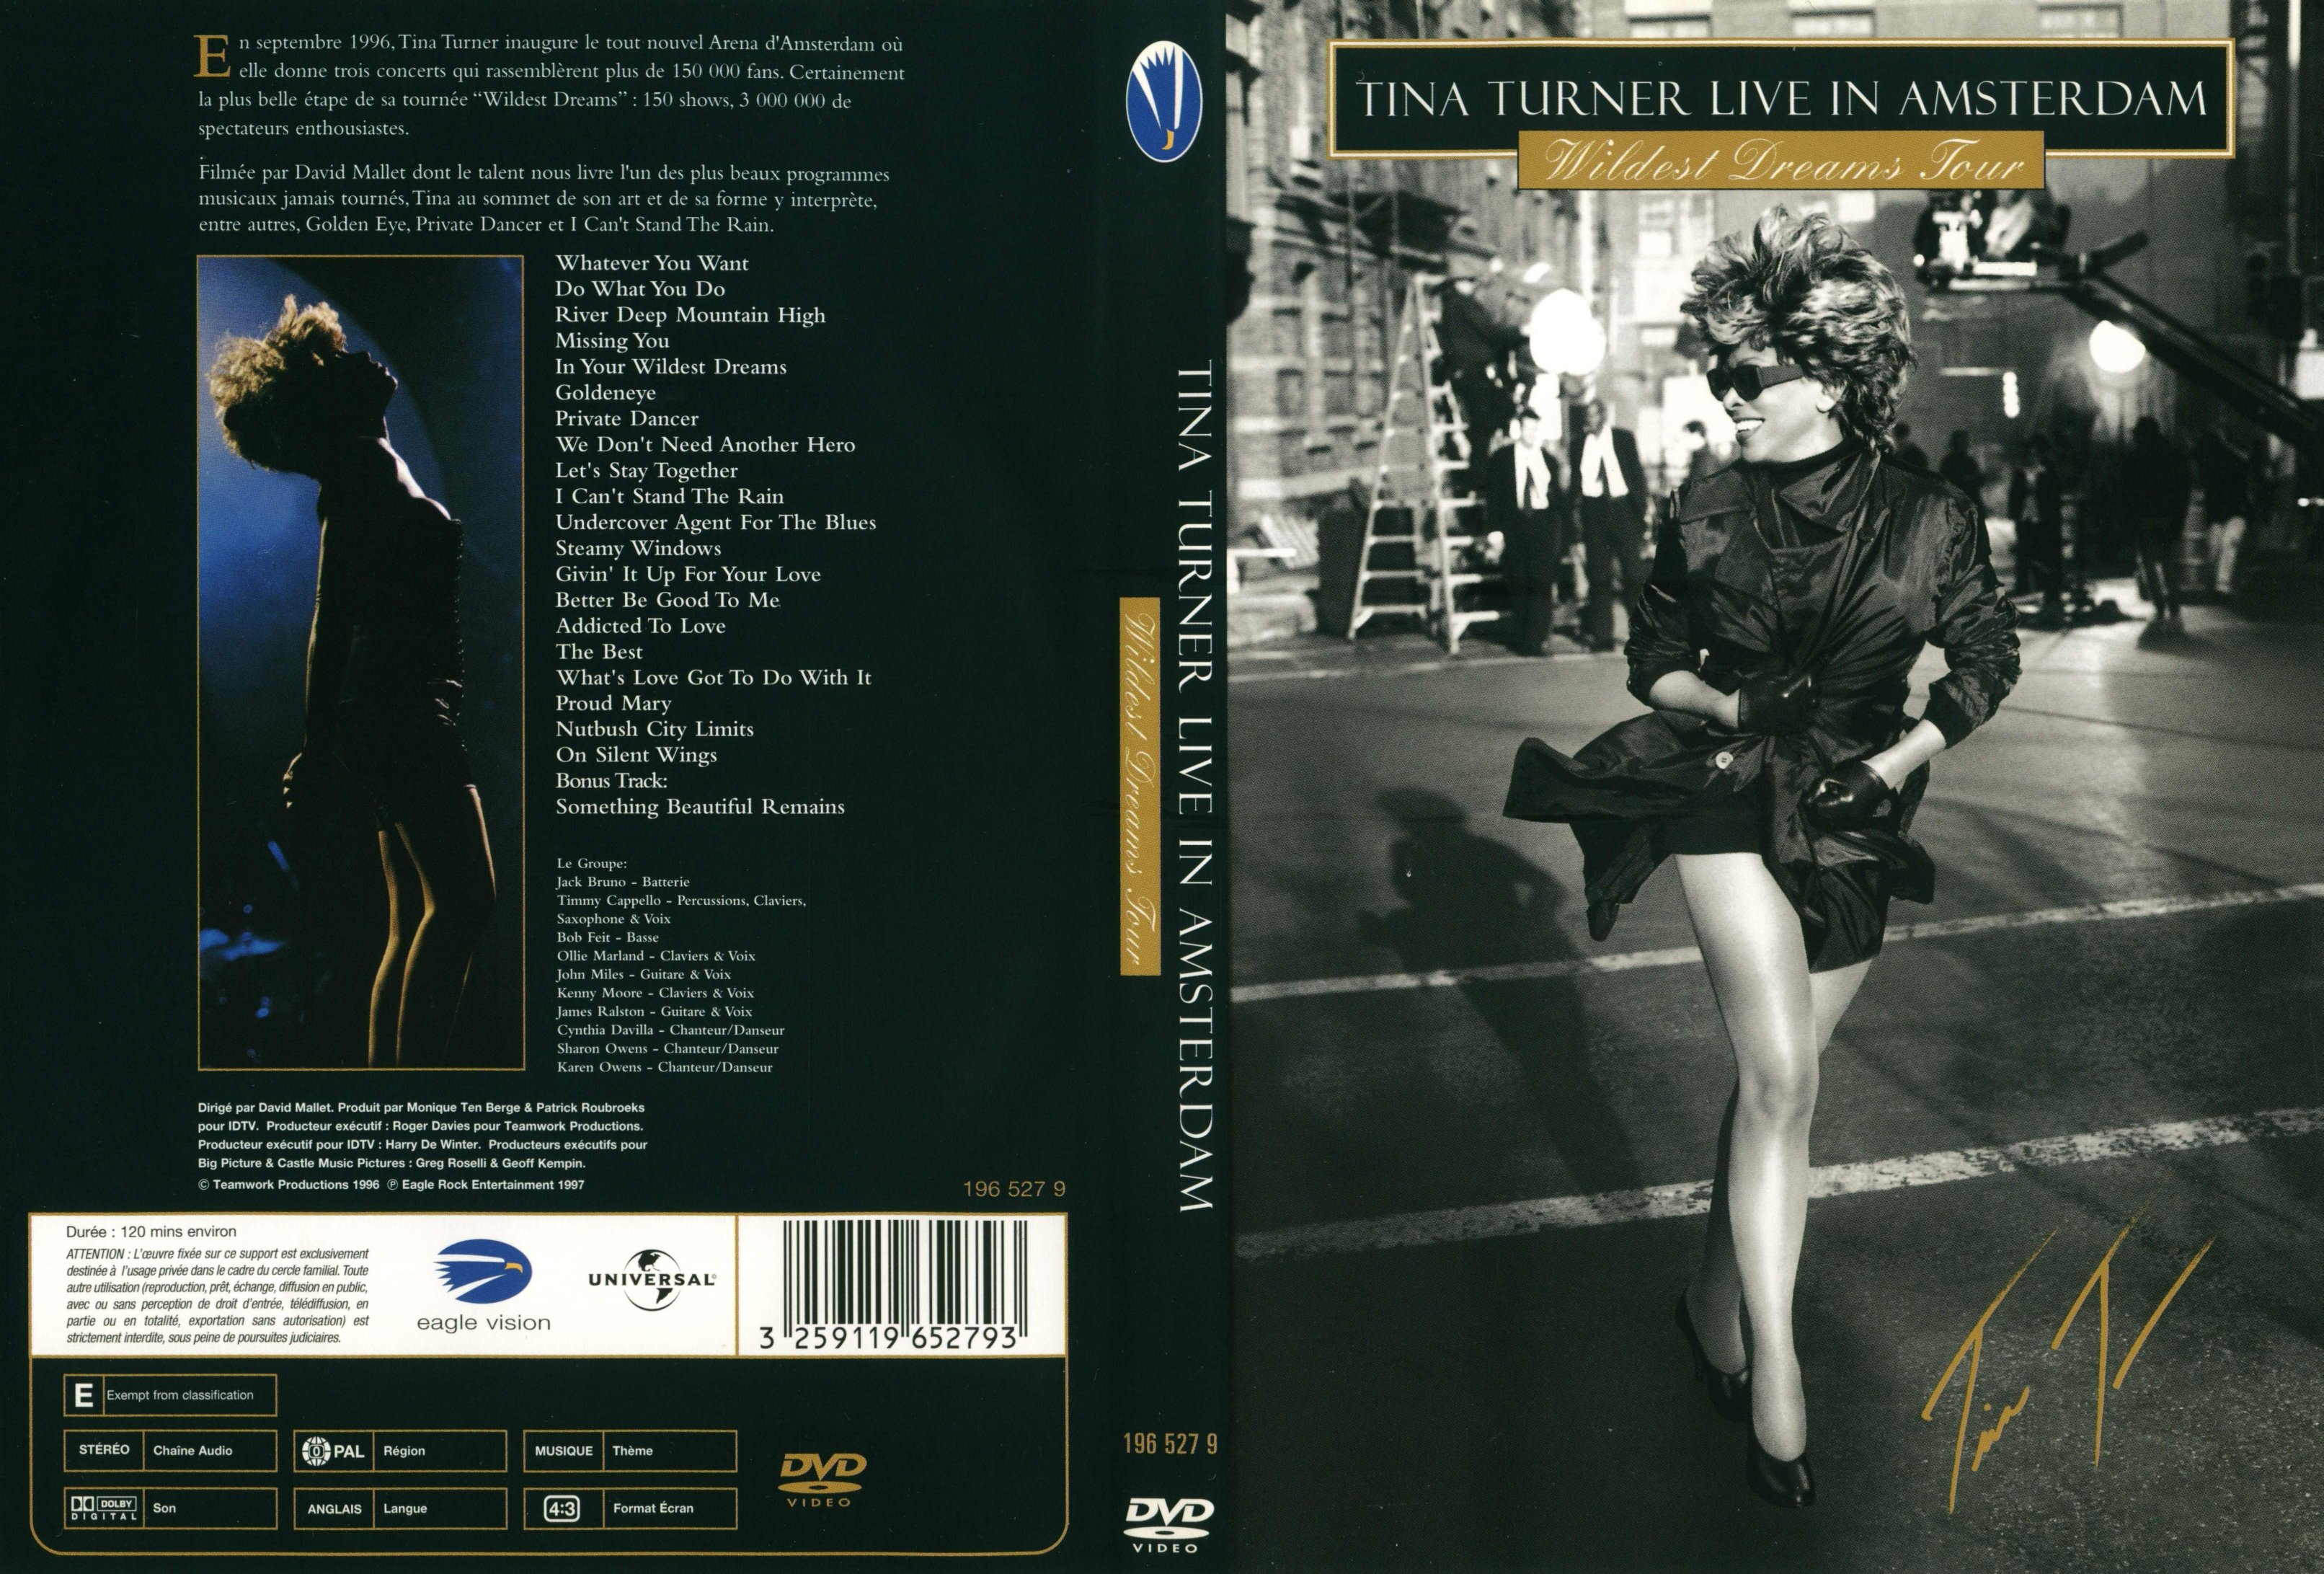 Jaquette DVD Tina Turner Live in Amsterdam